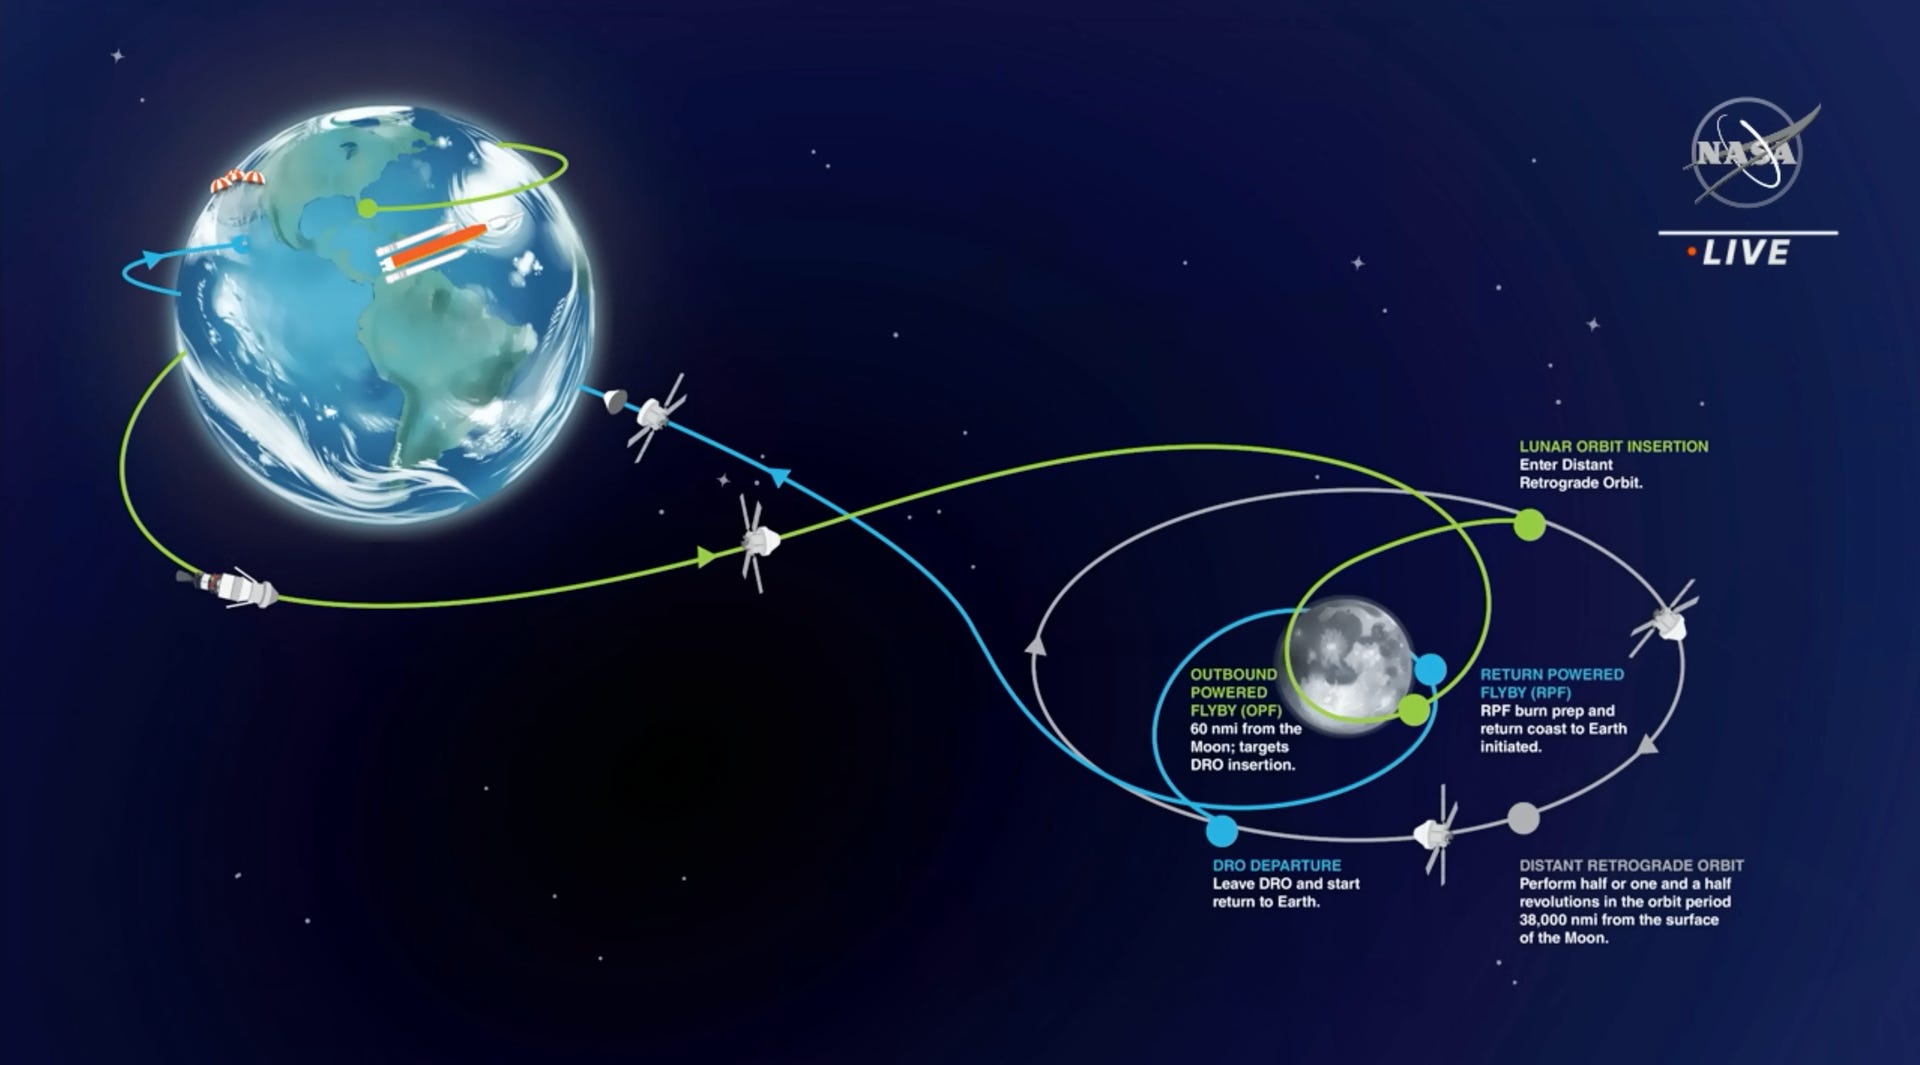 A diagram showing how Orion will fly to the moon, around the moon and back. Several gravity assists are present during the journey and some checkpoints are outlined where translunar injections and departures will occur.